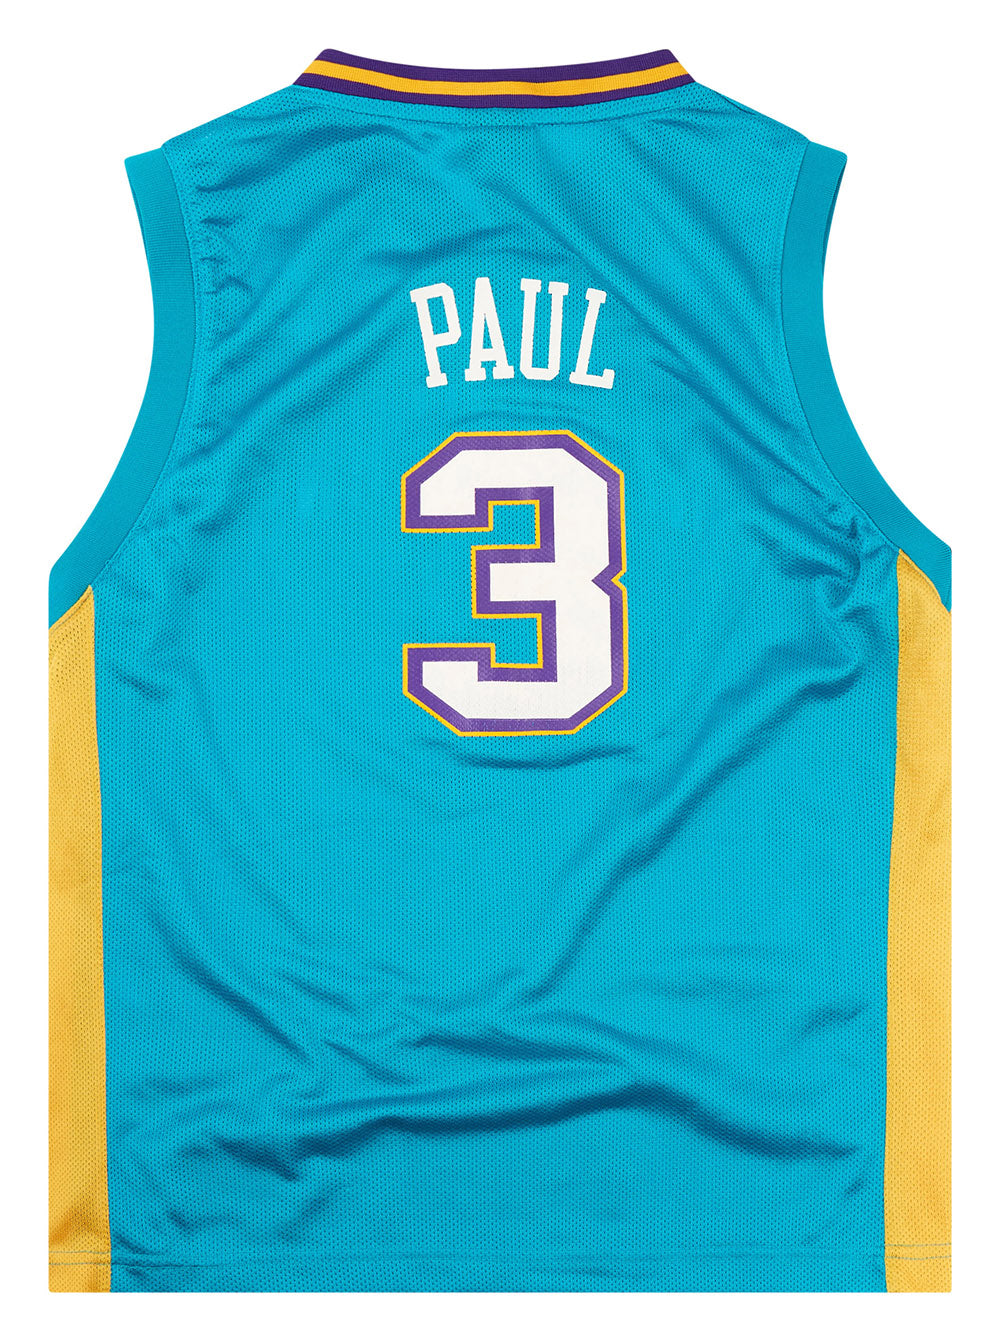 2006-08 NEW ORLEANS HORNETS PAUL #3 ADIDAS JERSEY (AWAY) Y